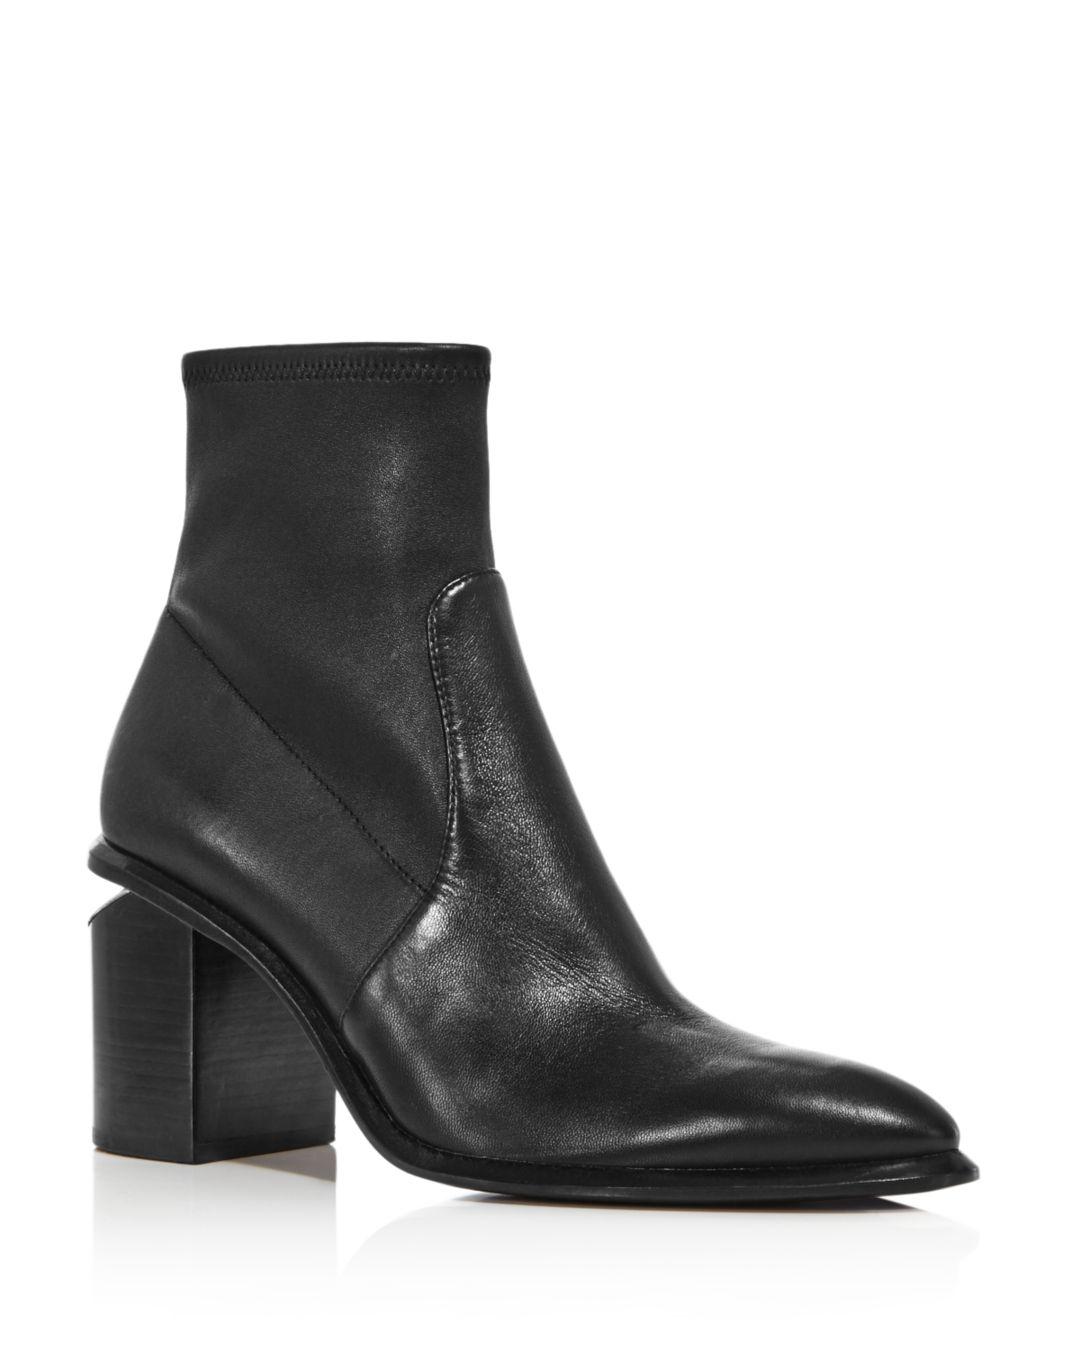 Alexander Wang Women's Anna Stretch Leather Booties in Black Leather ...